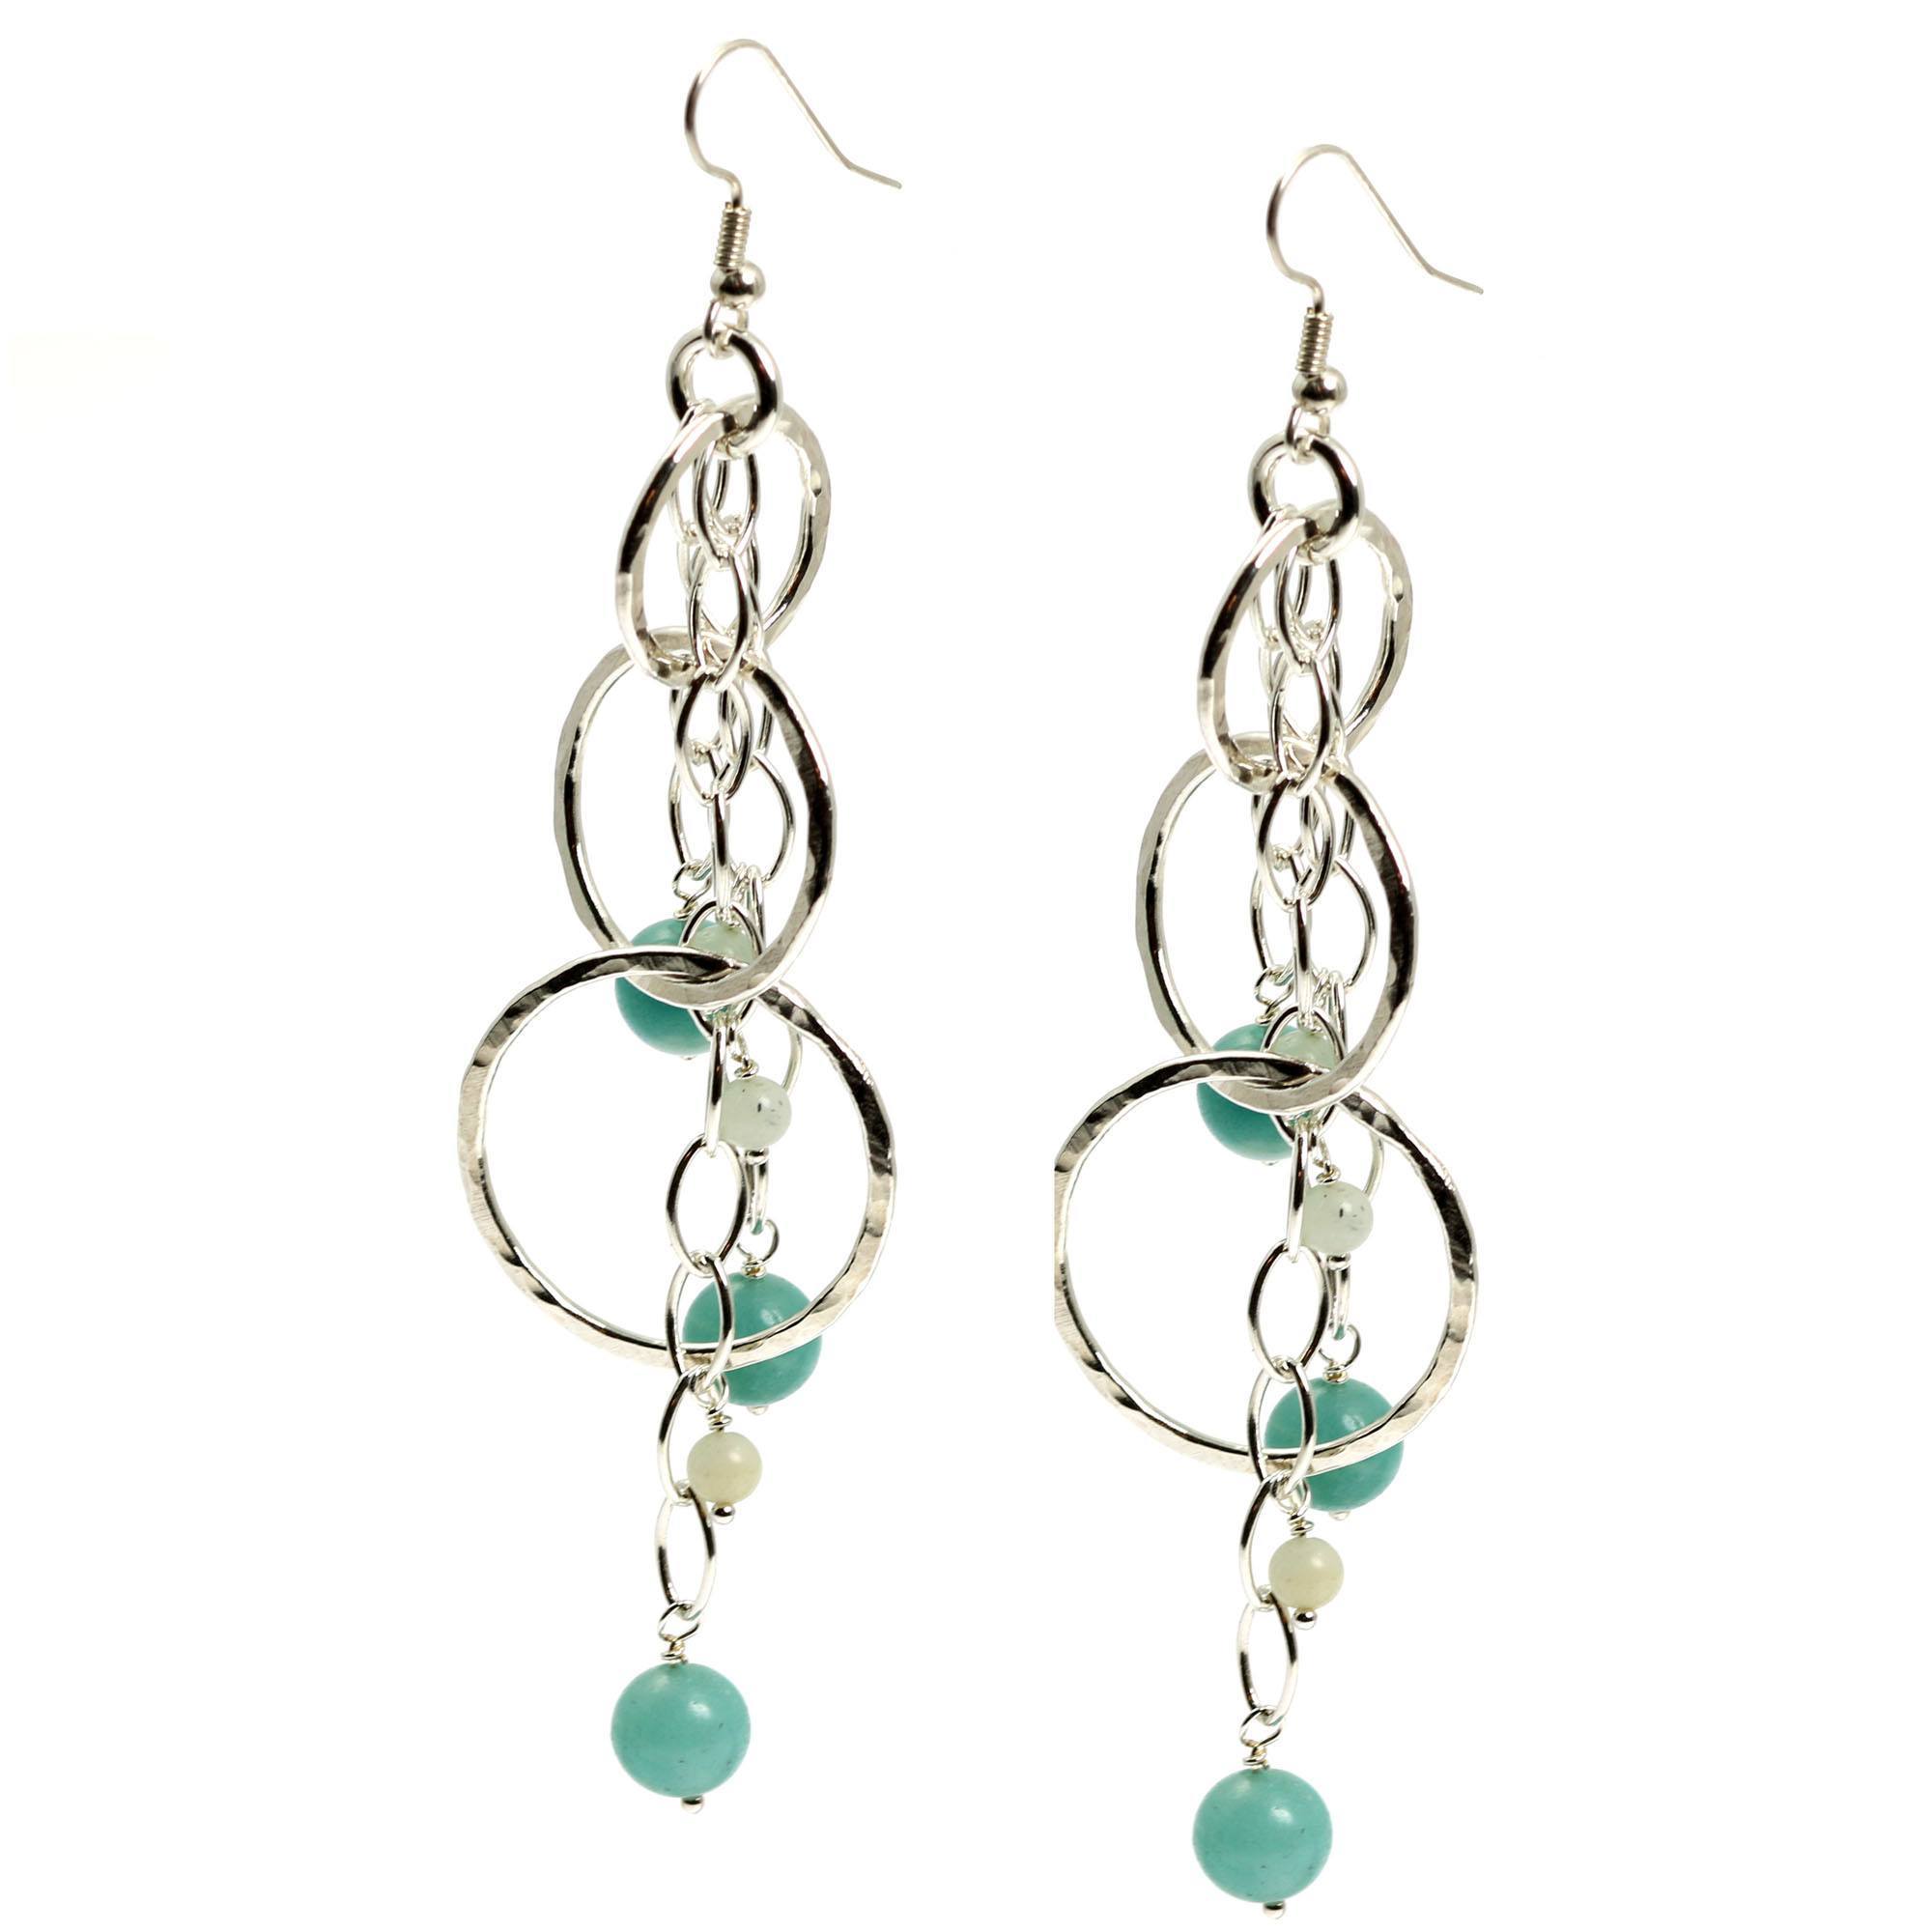 Detail View of Amazonite Hammered Fine Silver Earrings